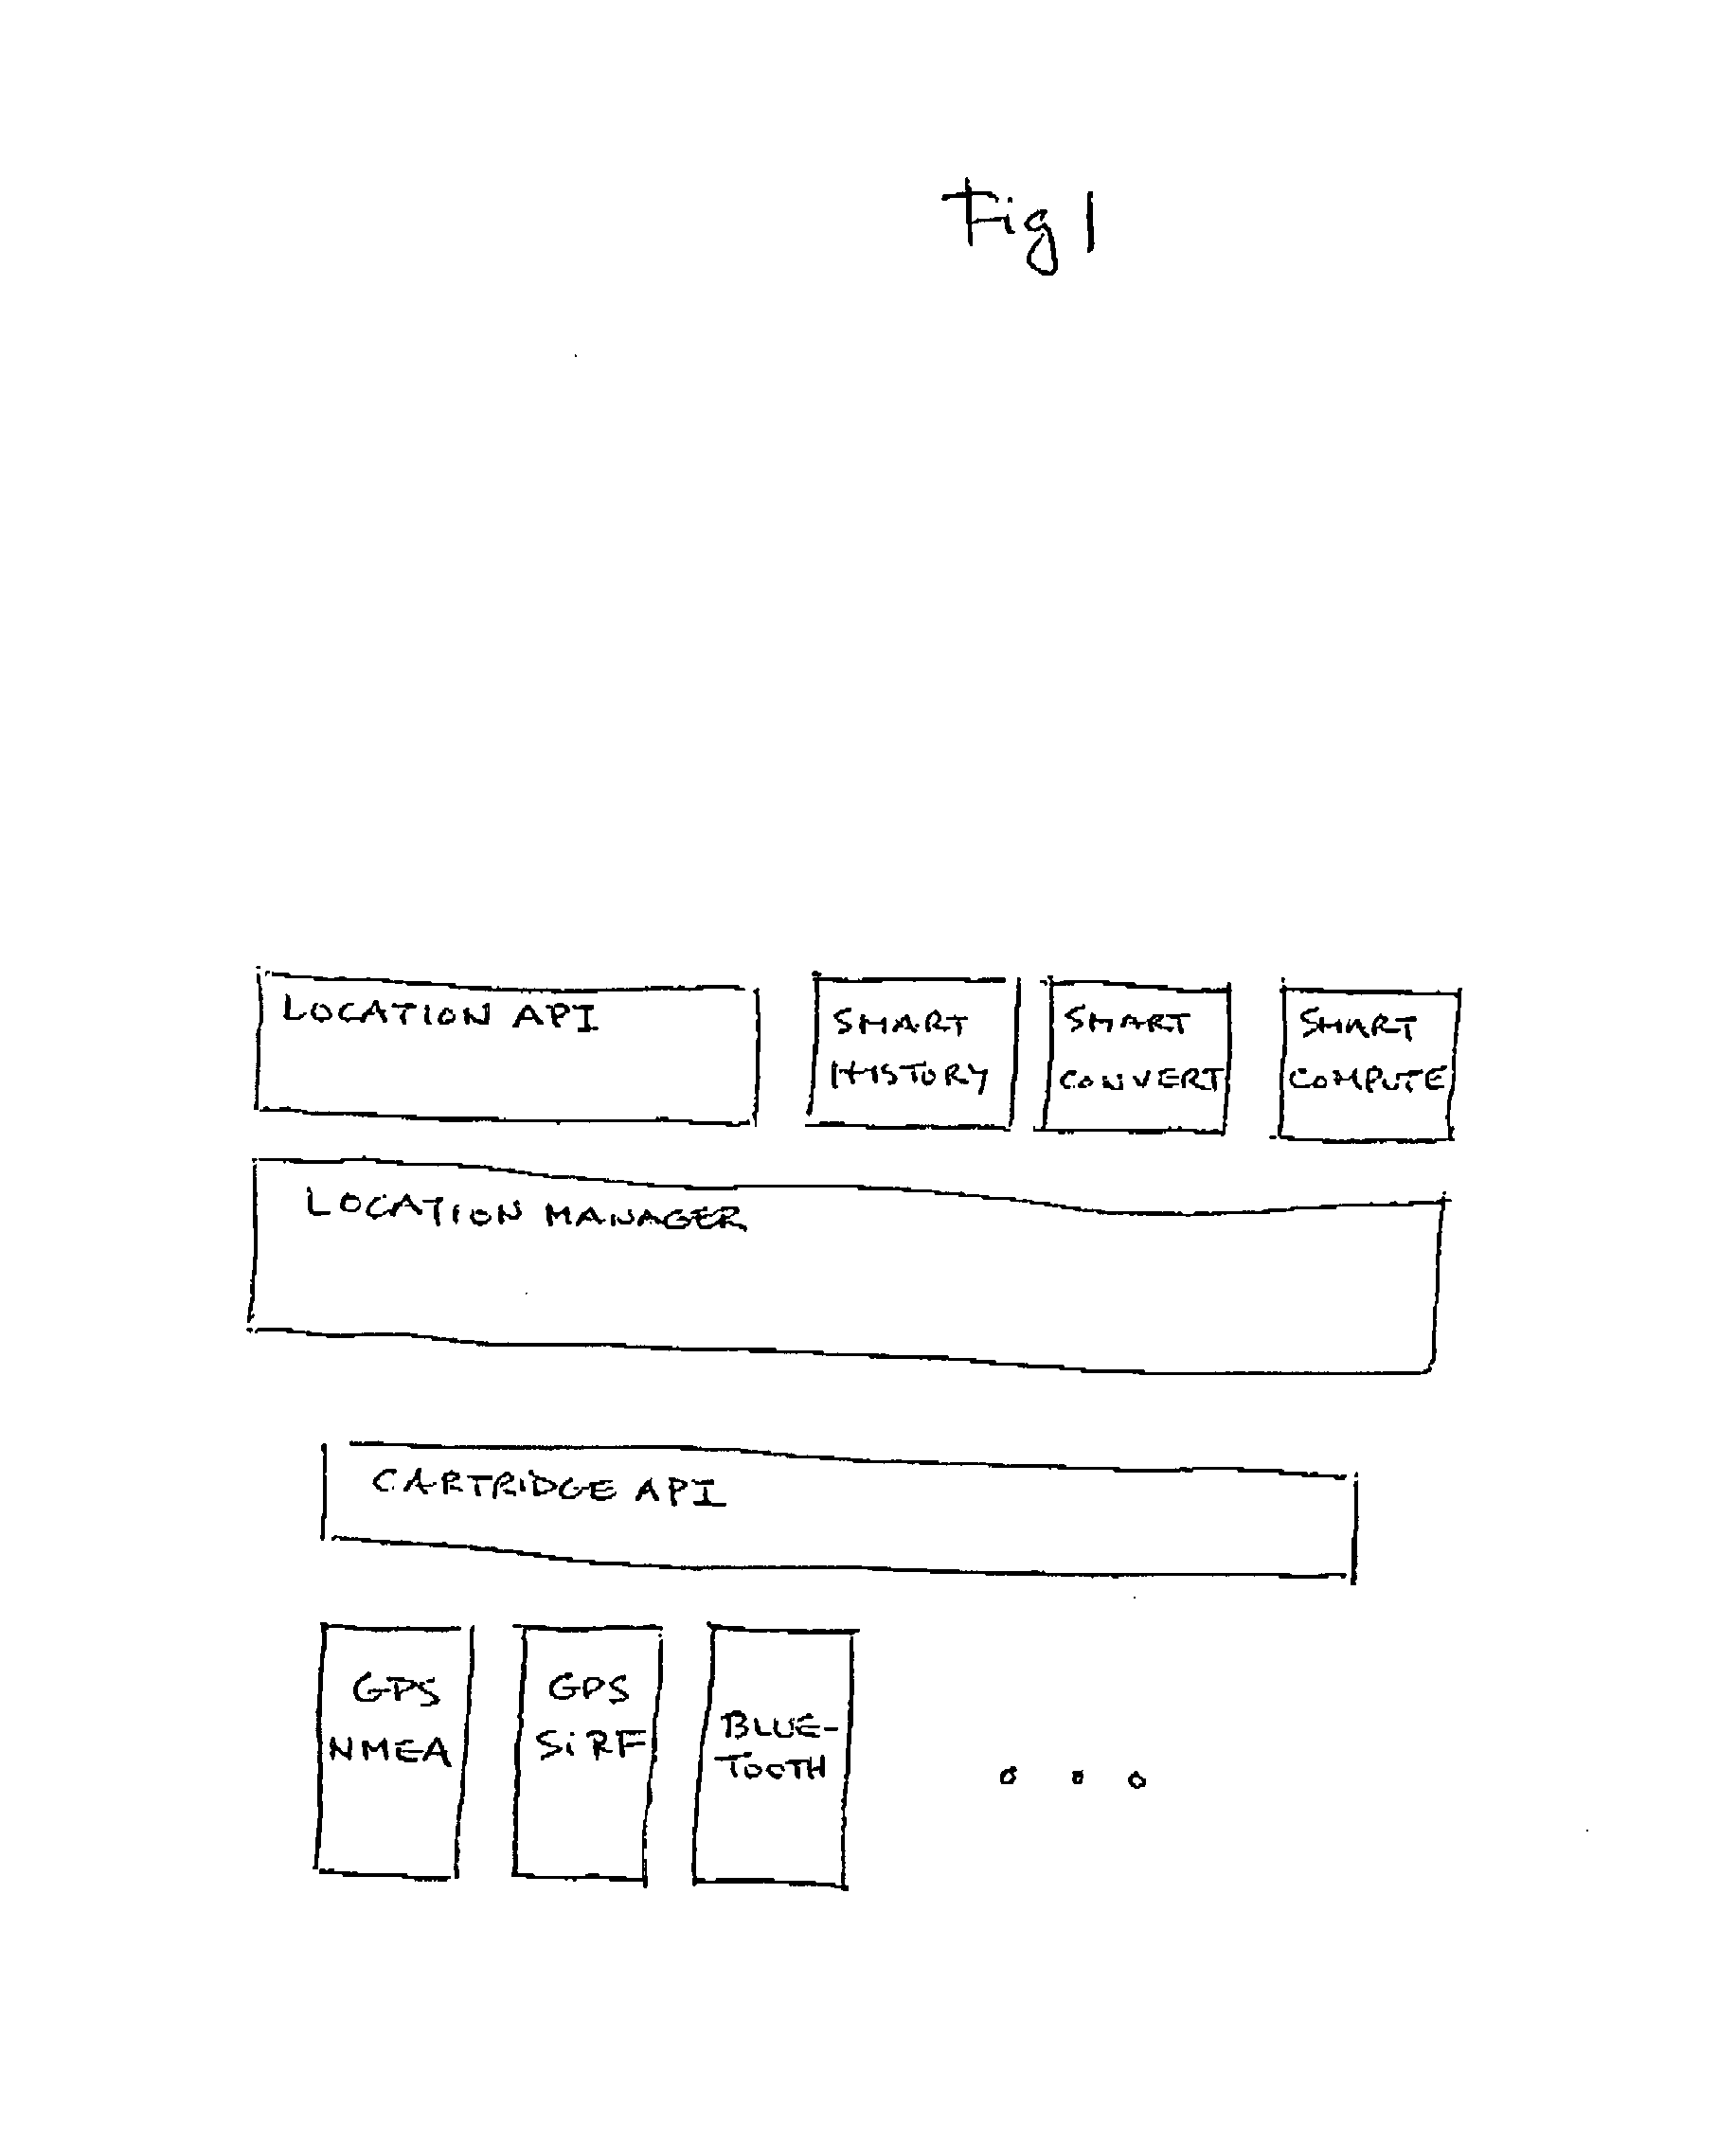 Method for handling position data in a mobile equipment, and a mobile equipment having improved position data handling capabilities